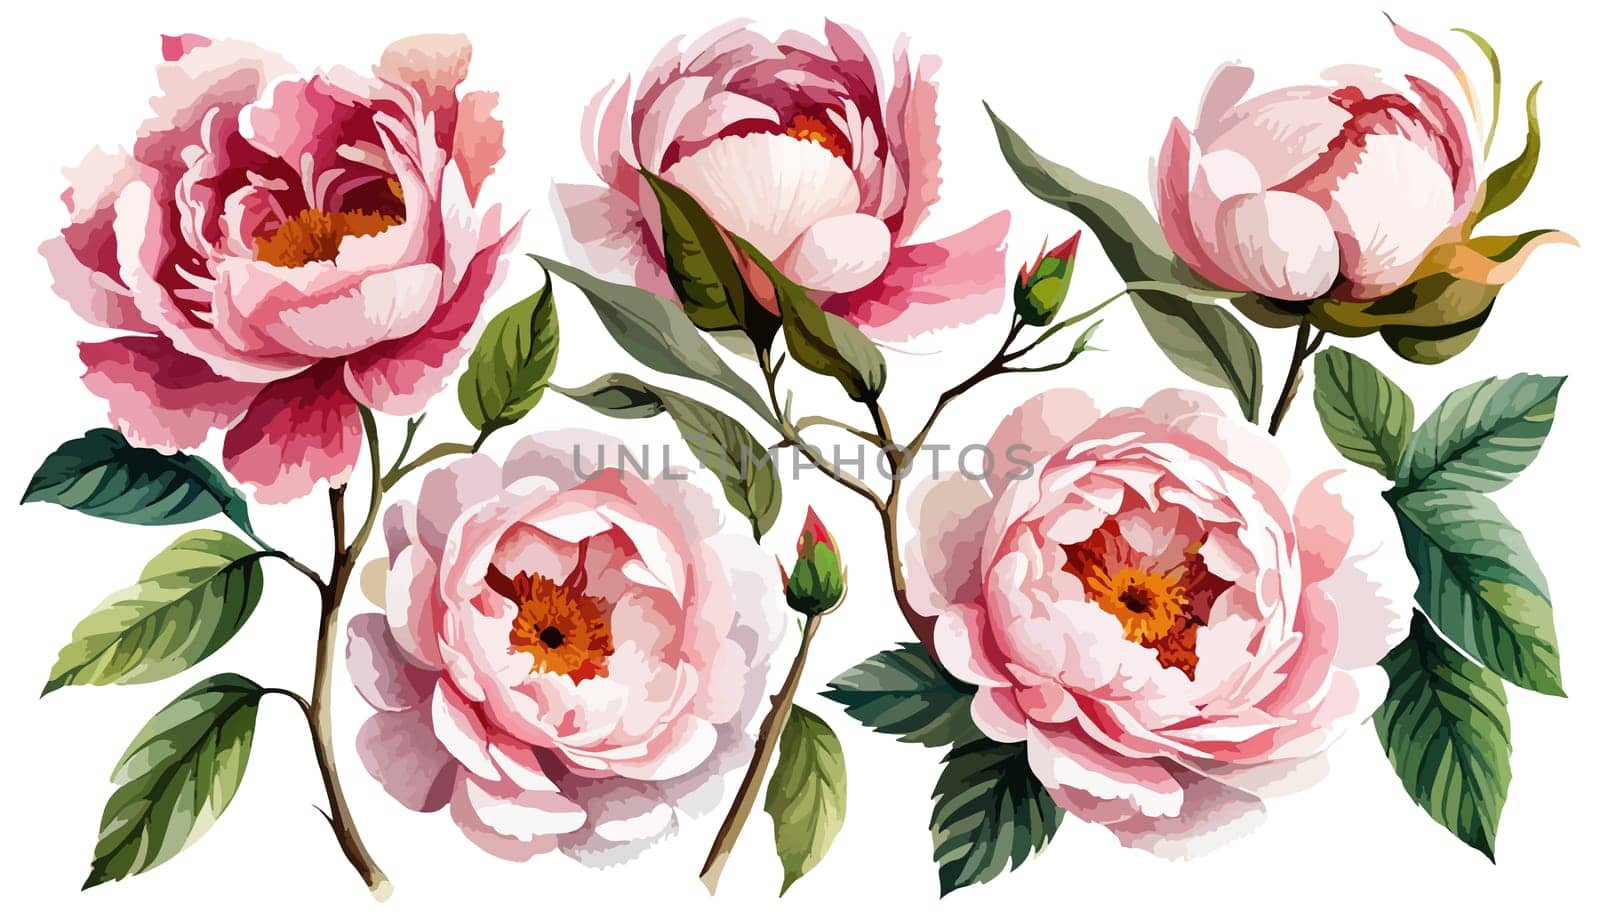 Watercolor floral set. Pink peonies flower, green leaves individual elements collection for bouquets, wreaths, wedding invitations, anniversary, birthday, postcards, greetings. illustration